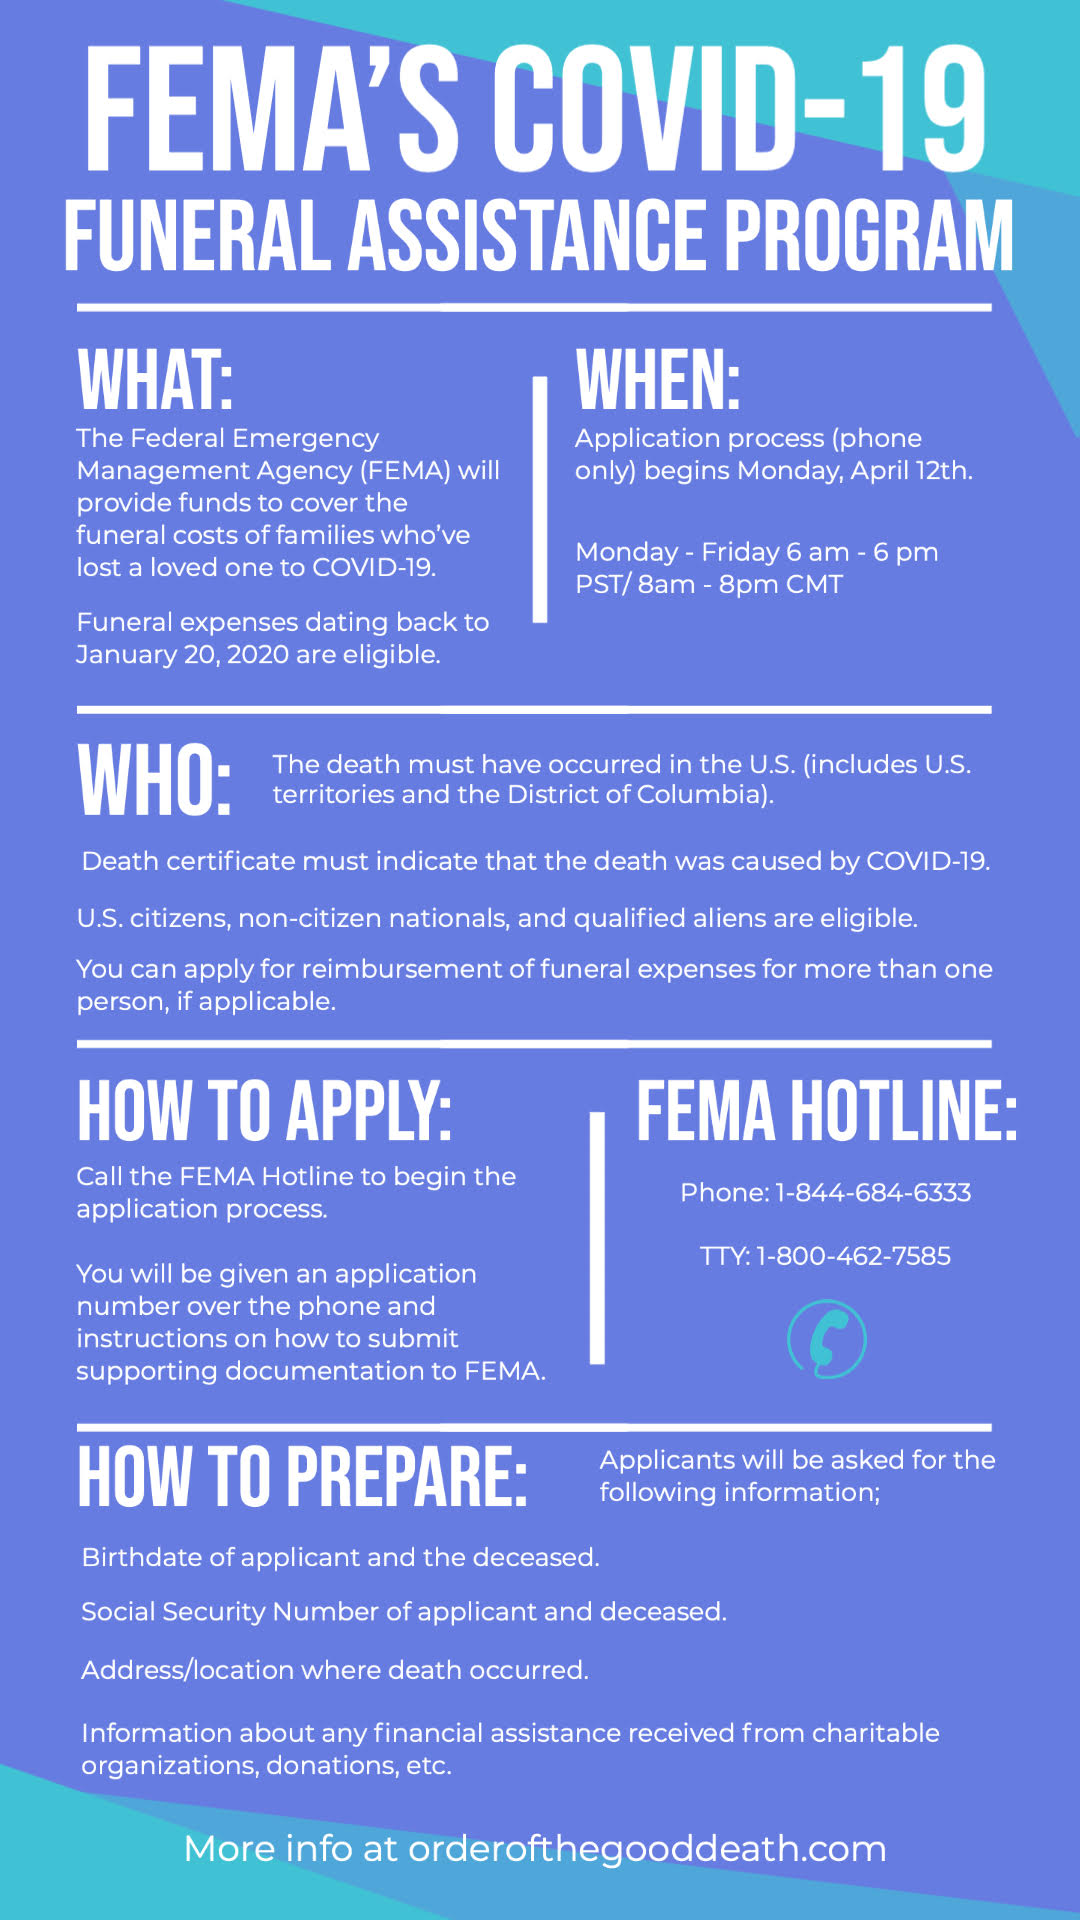 Graphic with text explaining Fema's Covid-19 Funeral Assistance Program.